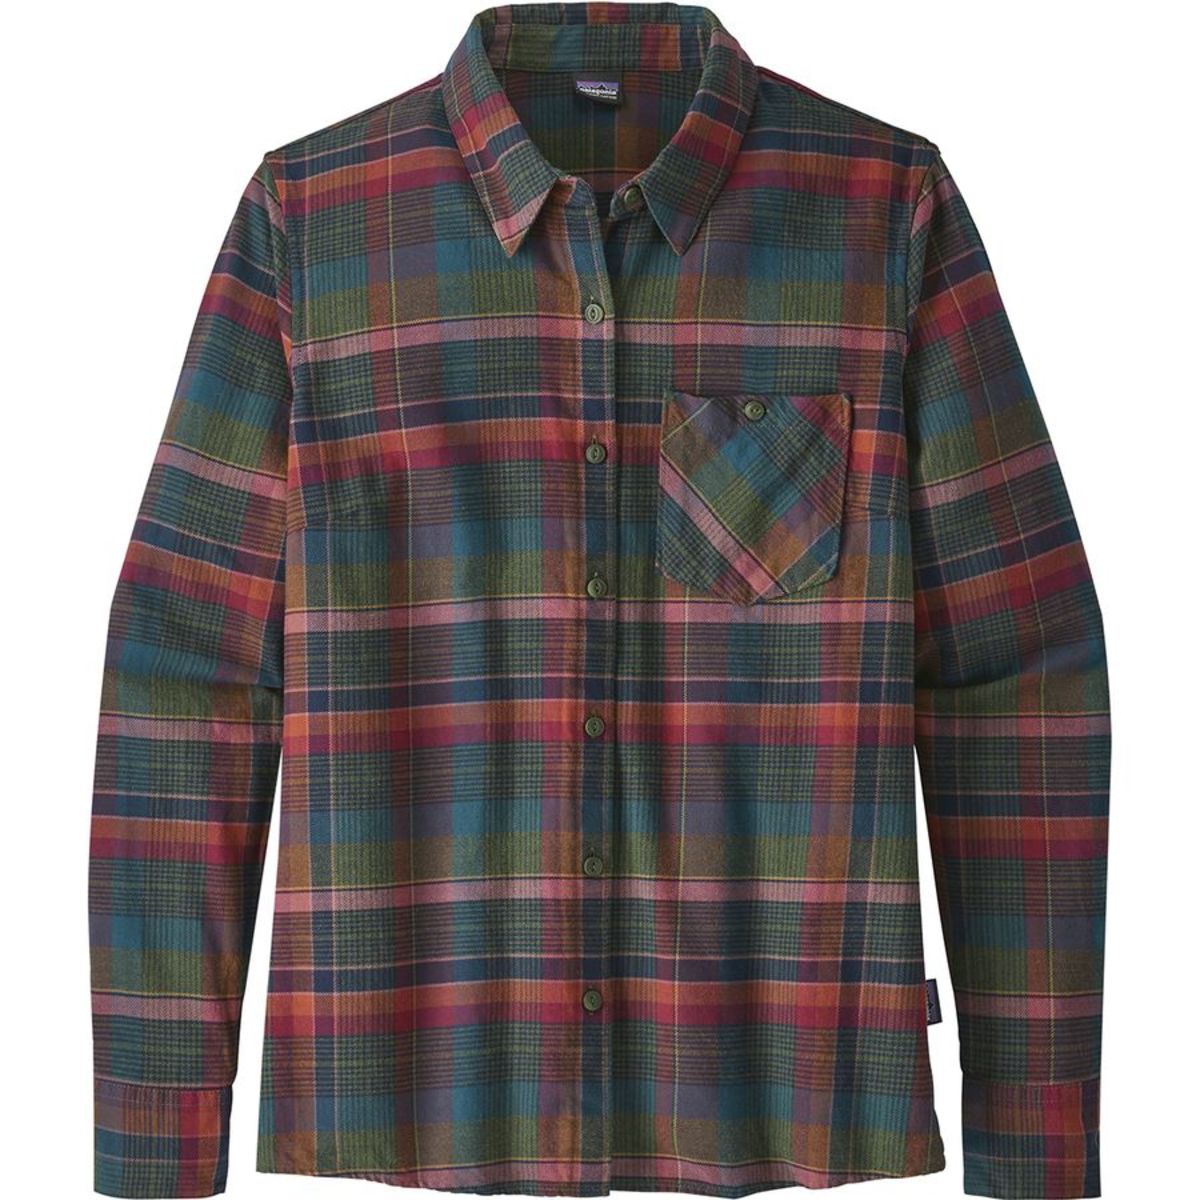 The Best Women's Flannel Shirts for Fall | POWDER - Powder